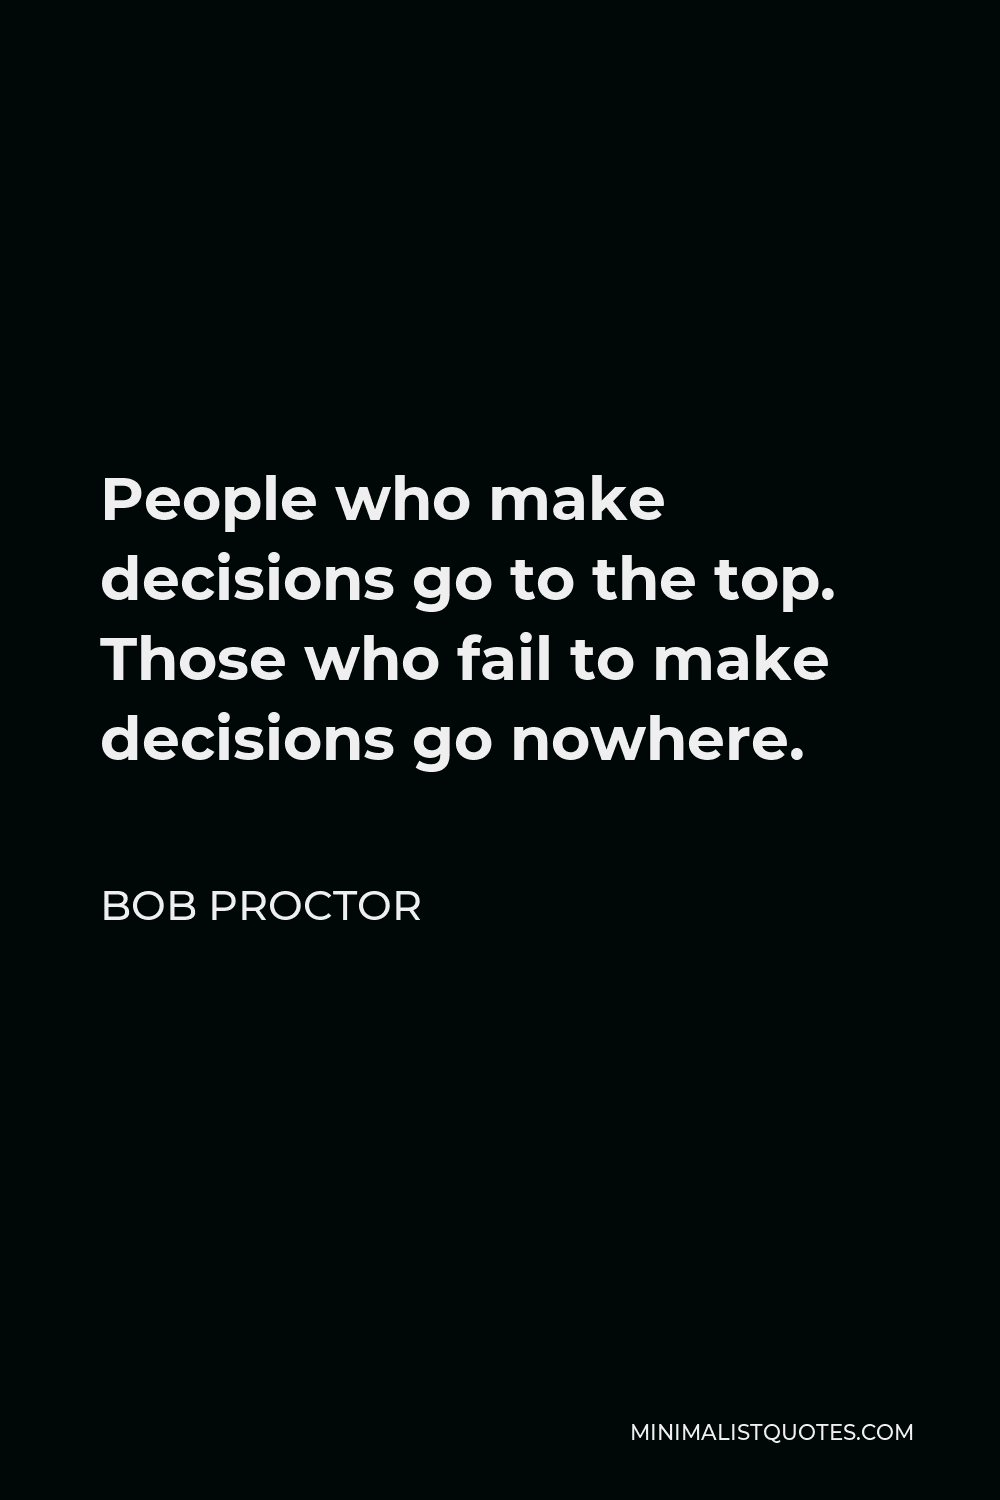 Bob Proctor Quote - People who make decisions go to the top. Those who fail to make decisions go nowhere.